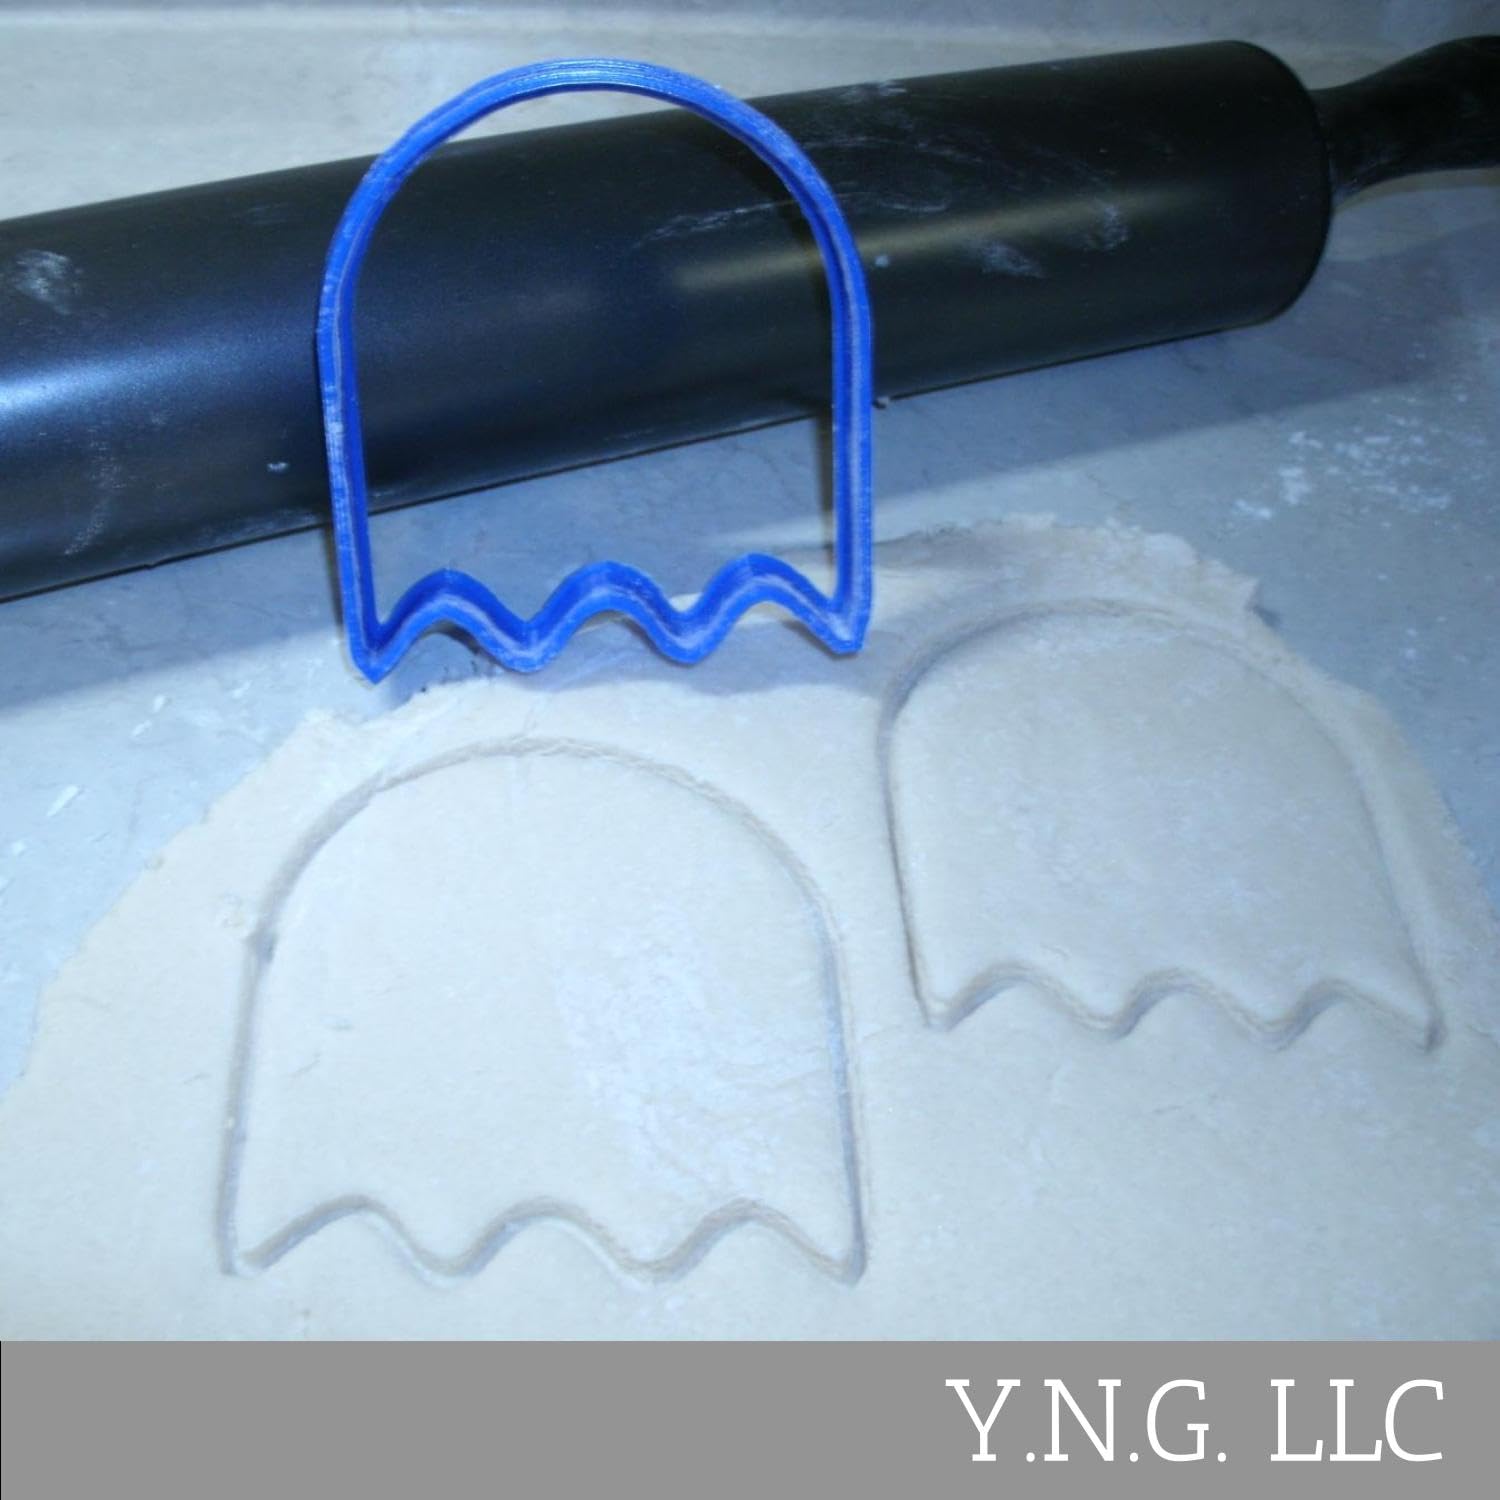 INSPIRED BY PACMAN GHOST VIDEO GAME ARCADE CHARACTER COOKIE CUTTER MADE IN USA PR496